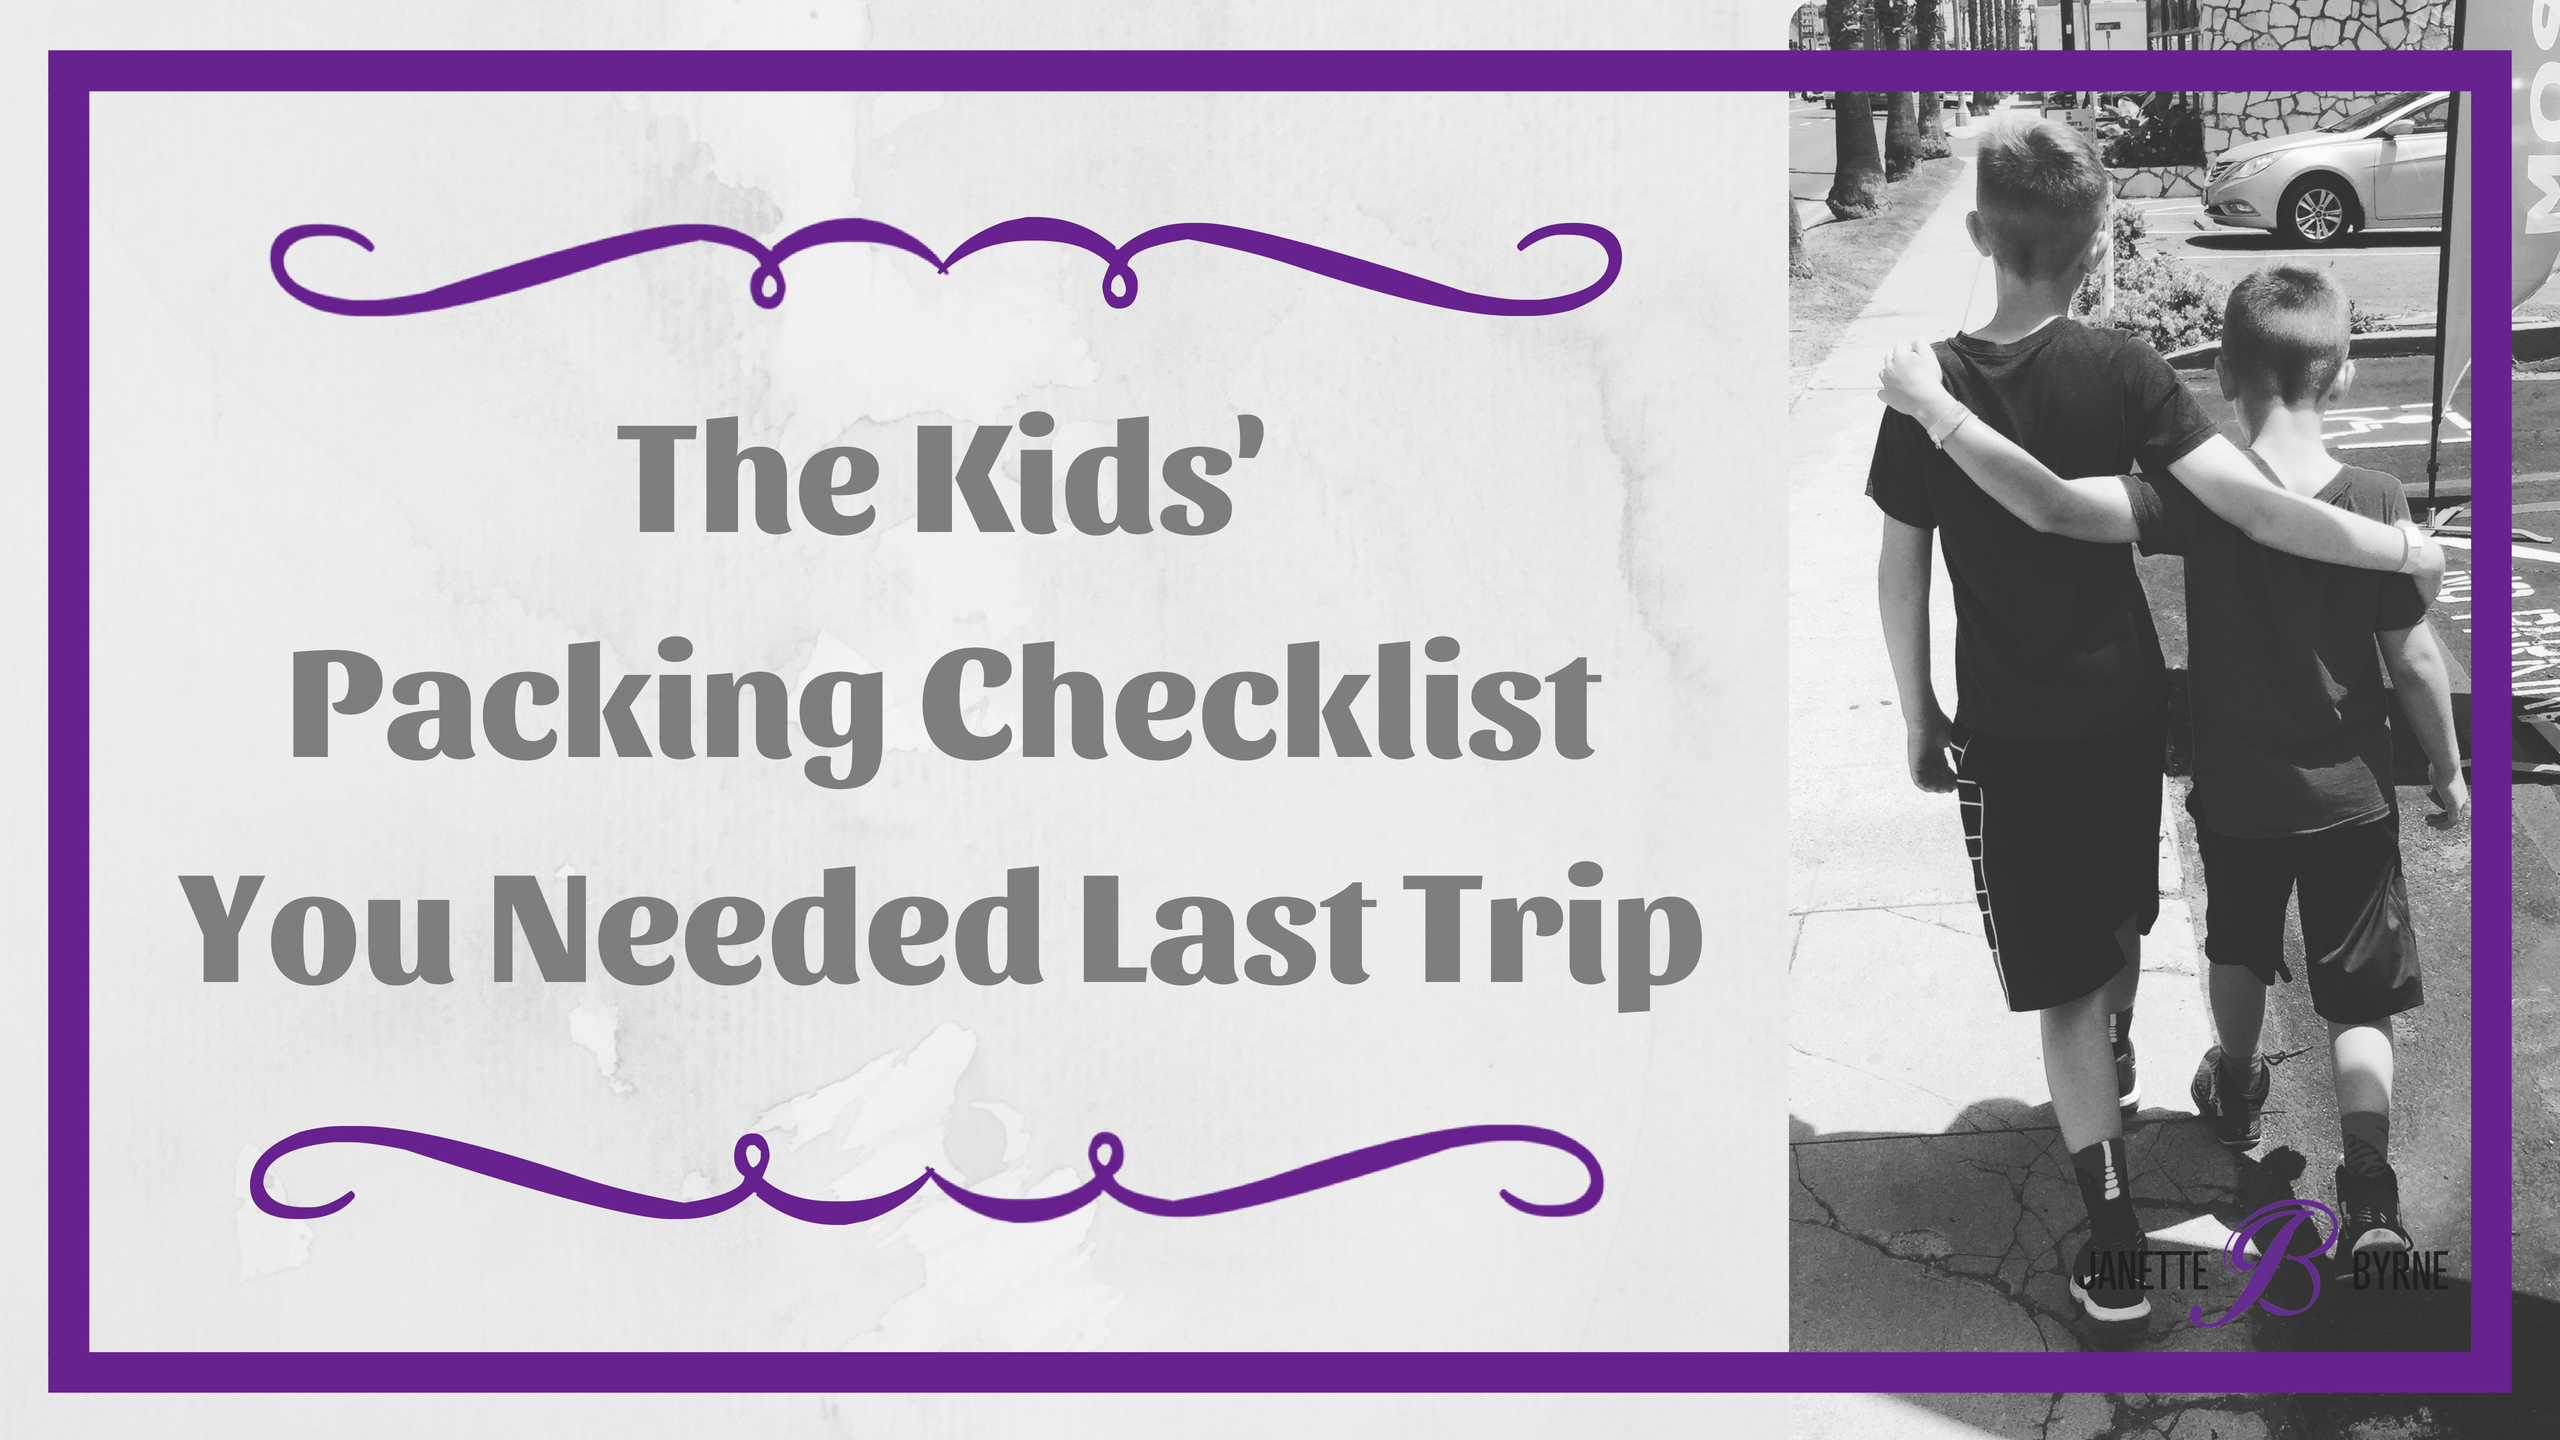 The Kids Packing Checklist You Needed Last Trip